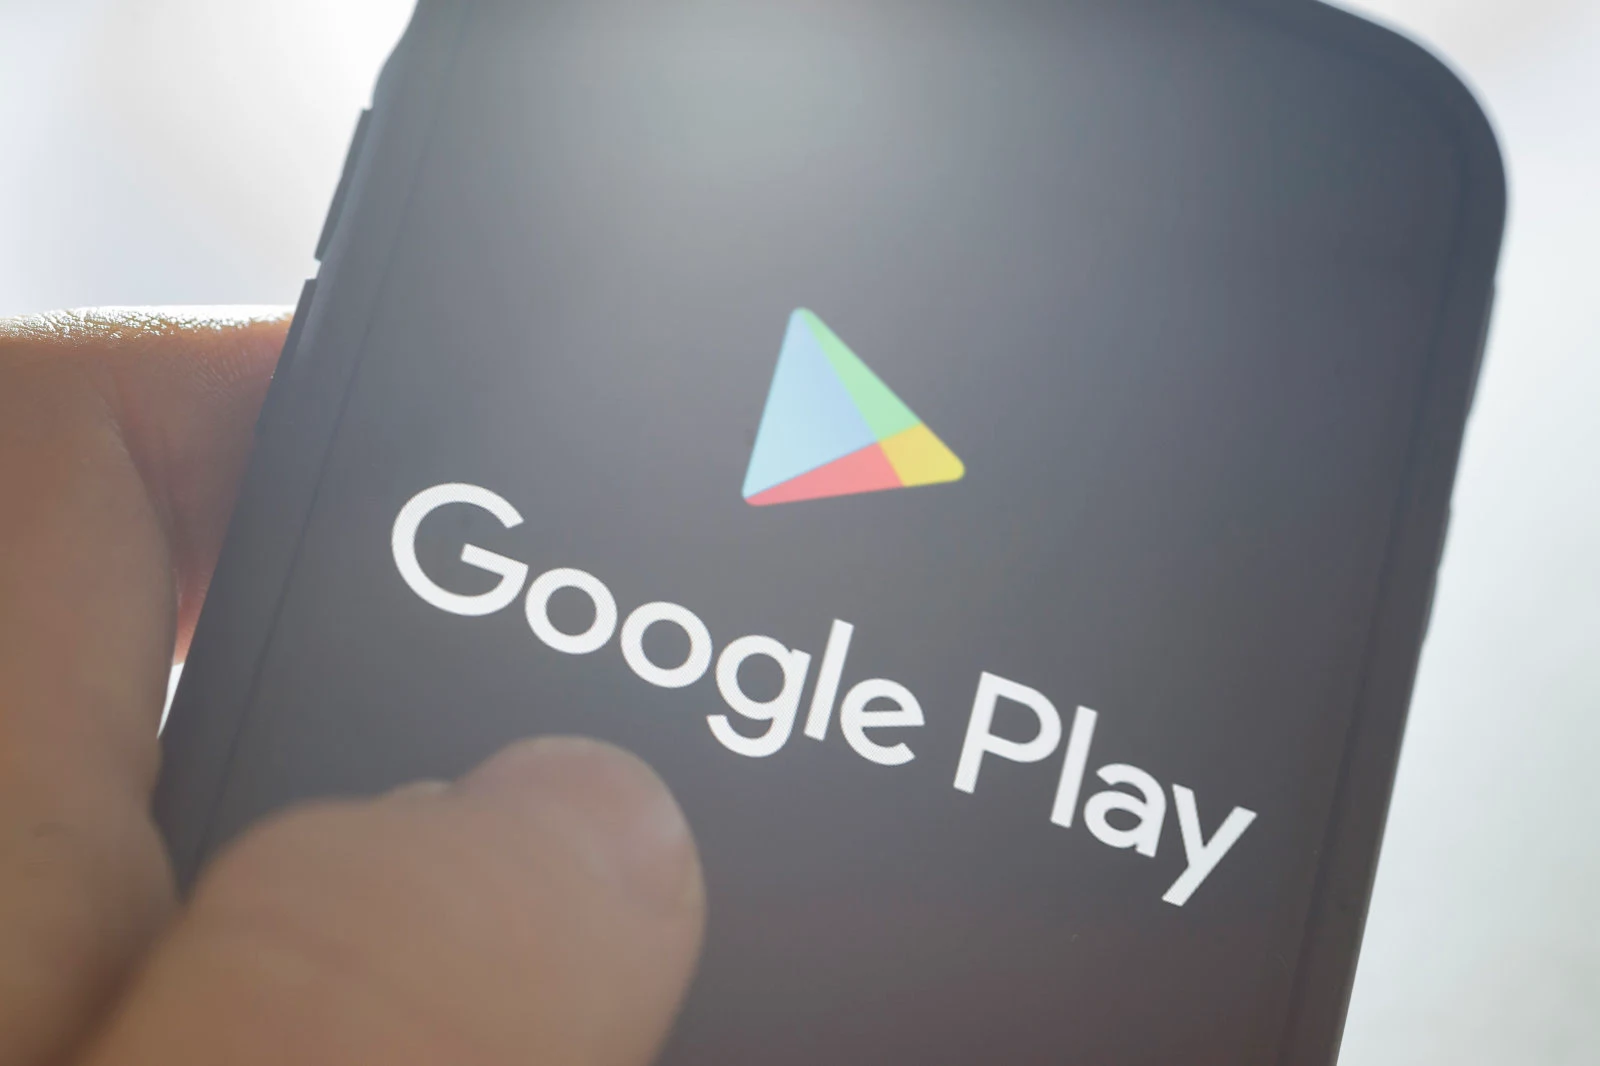 Android apps dealing with unwarranted substances will be banned by Google Play Store